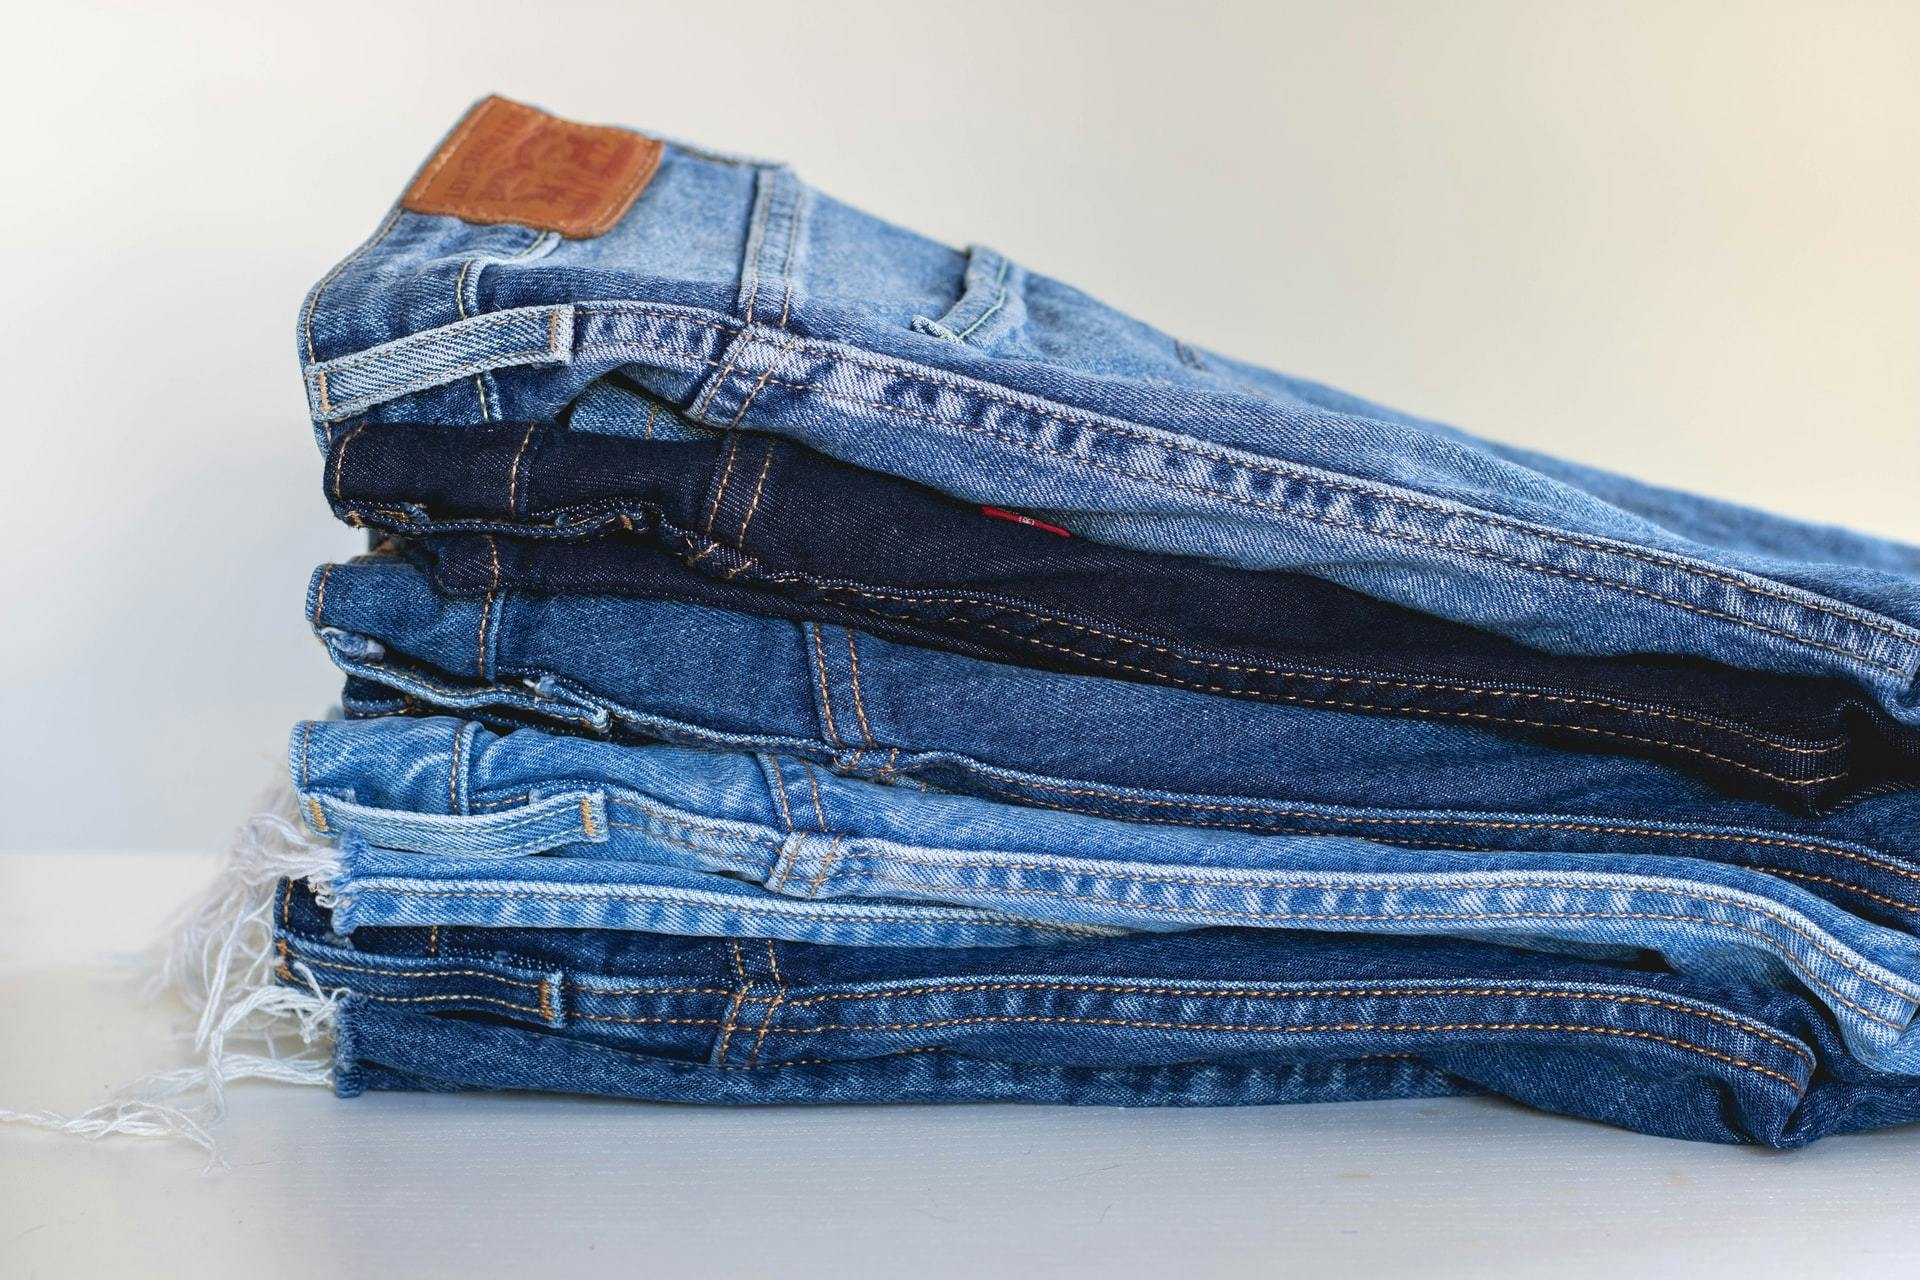 Best Of Labels: Levi Strauss & Co
